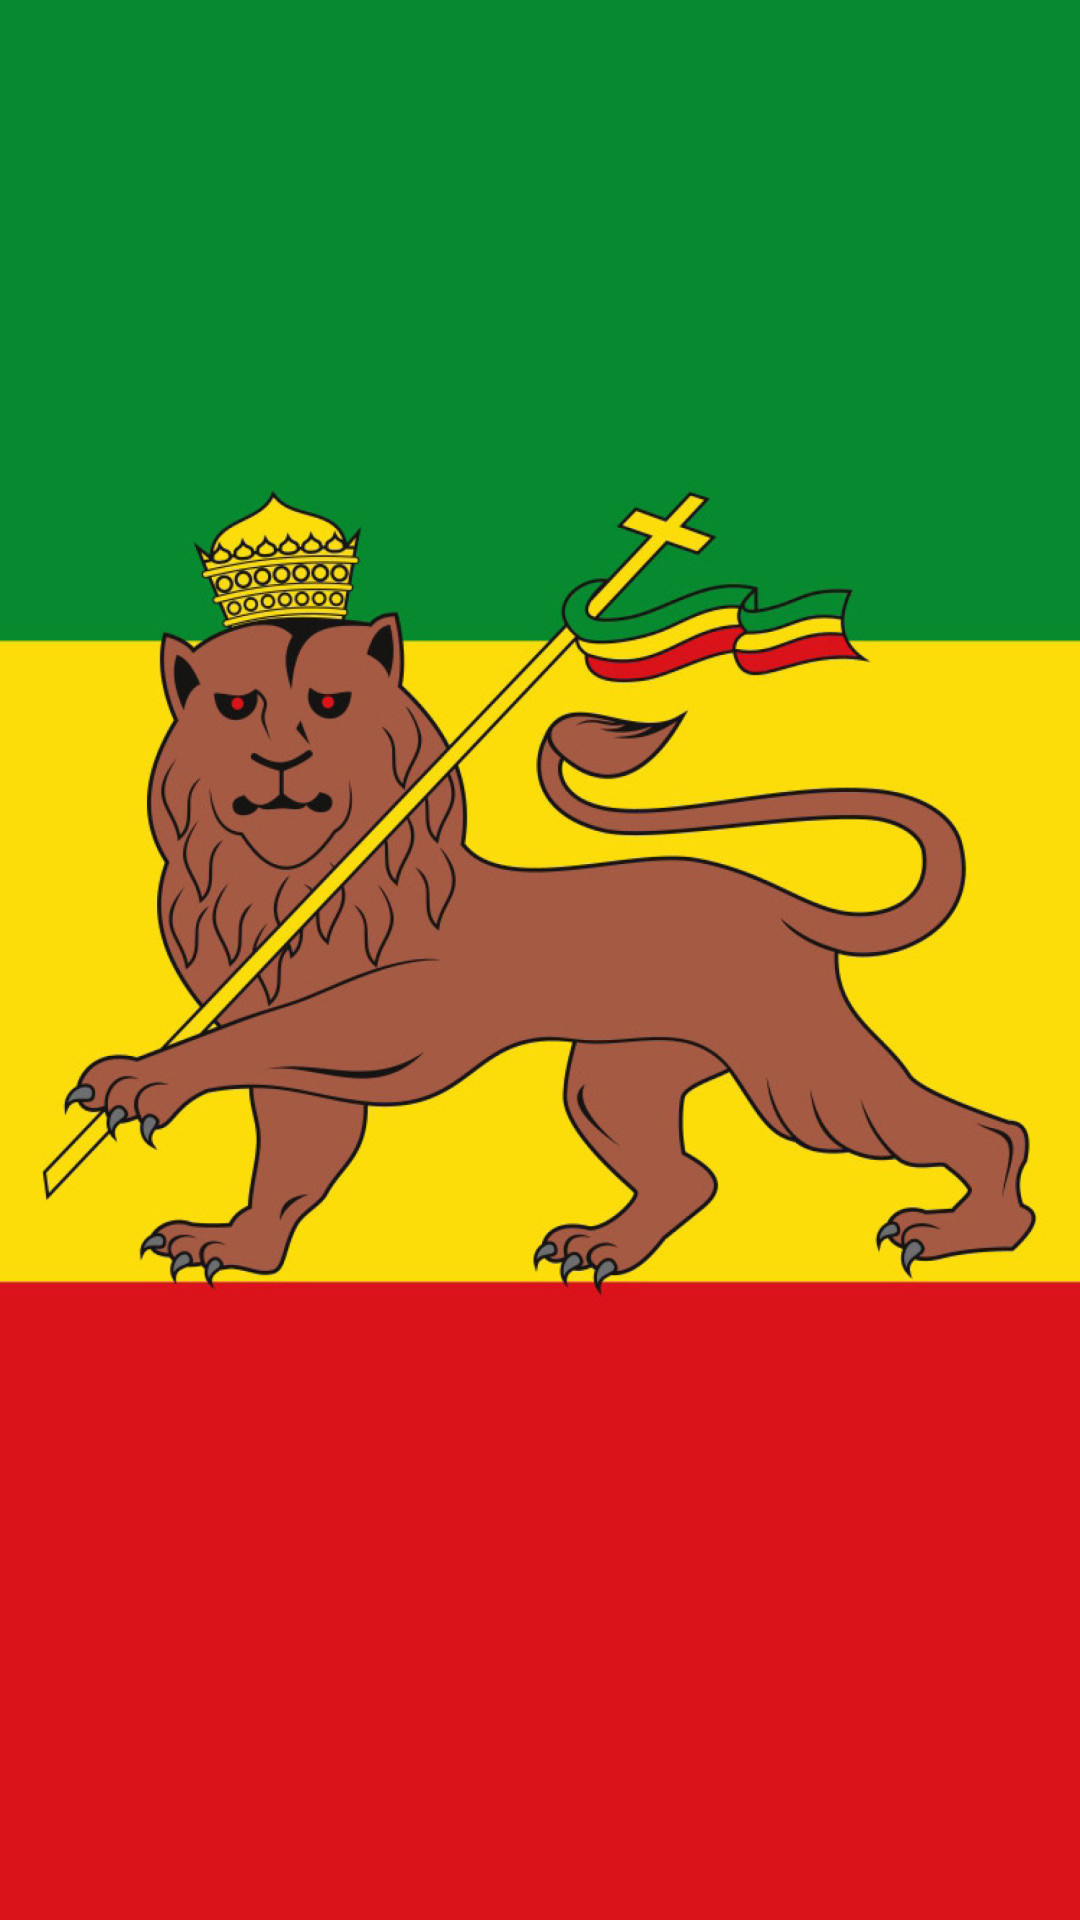 Ethiopian wallpapers, Mobile backgrounds, Cultural diversity, Natural beauty, 1080x1920 Full HD Handy